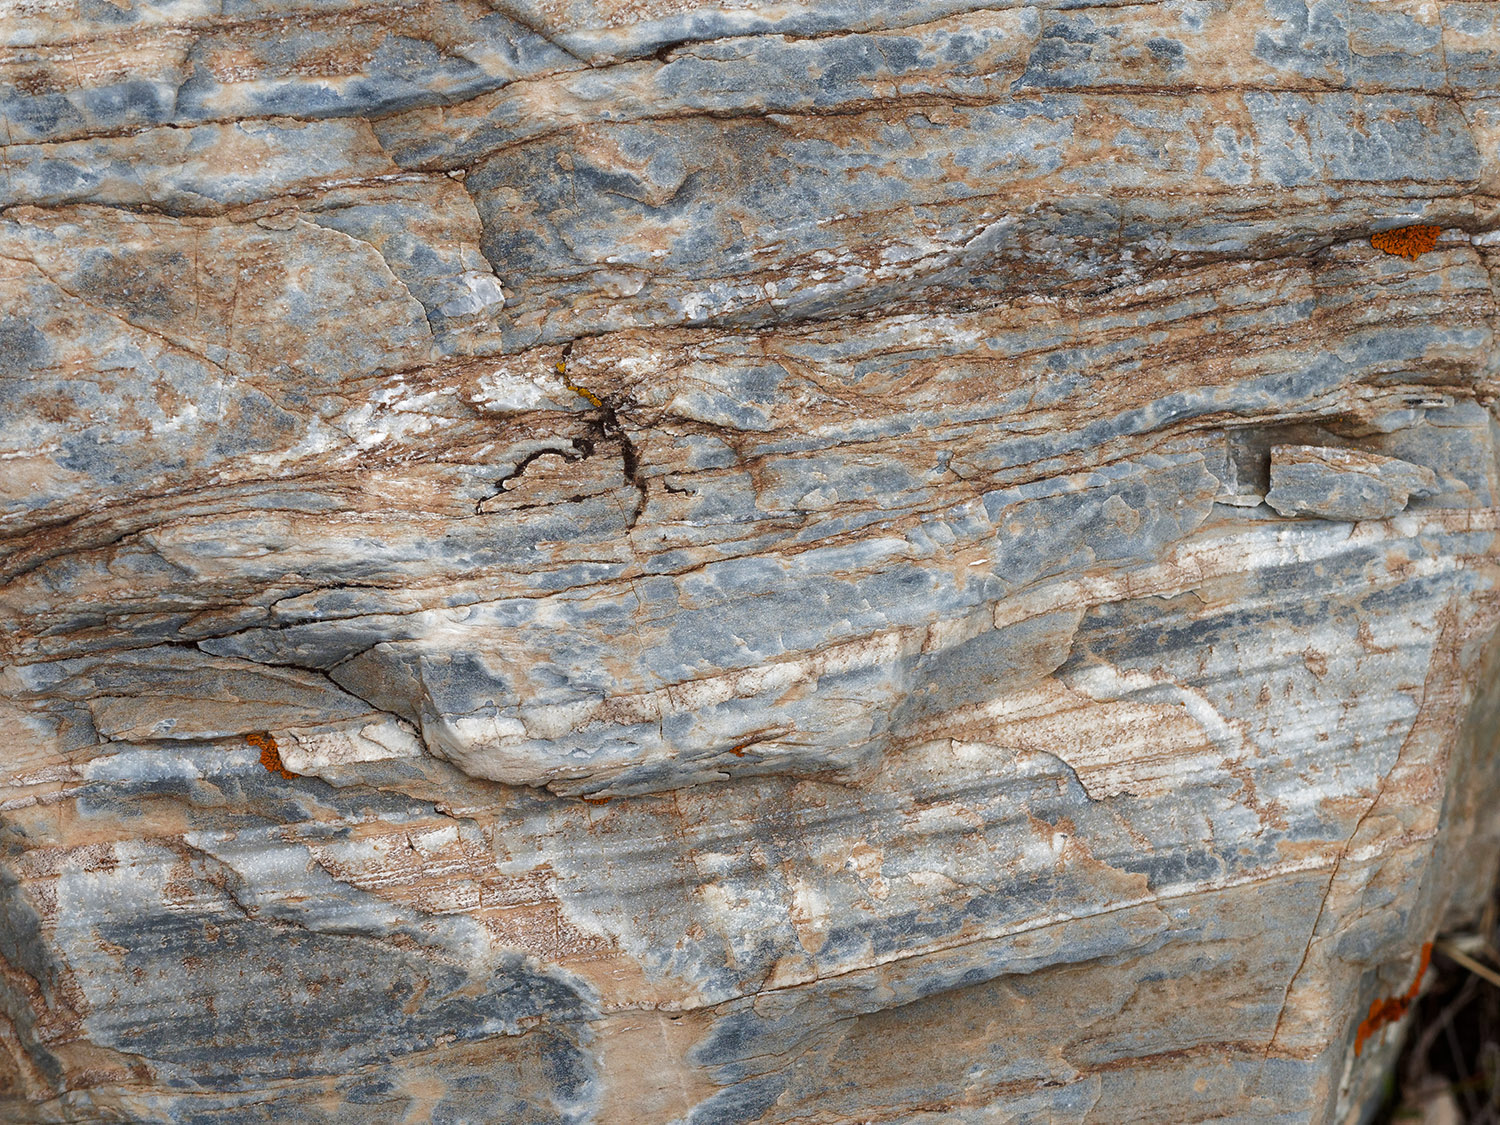 Detail of dolomite rock which along with gneiss, schist and amphibolite are the main metamorphic rocks found in the land slide debris.